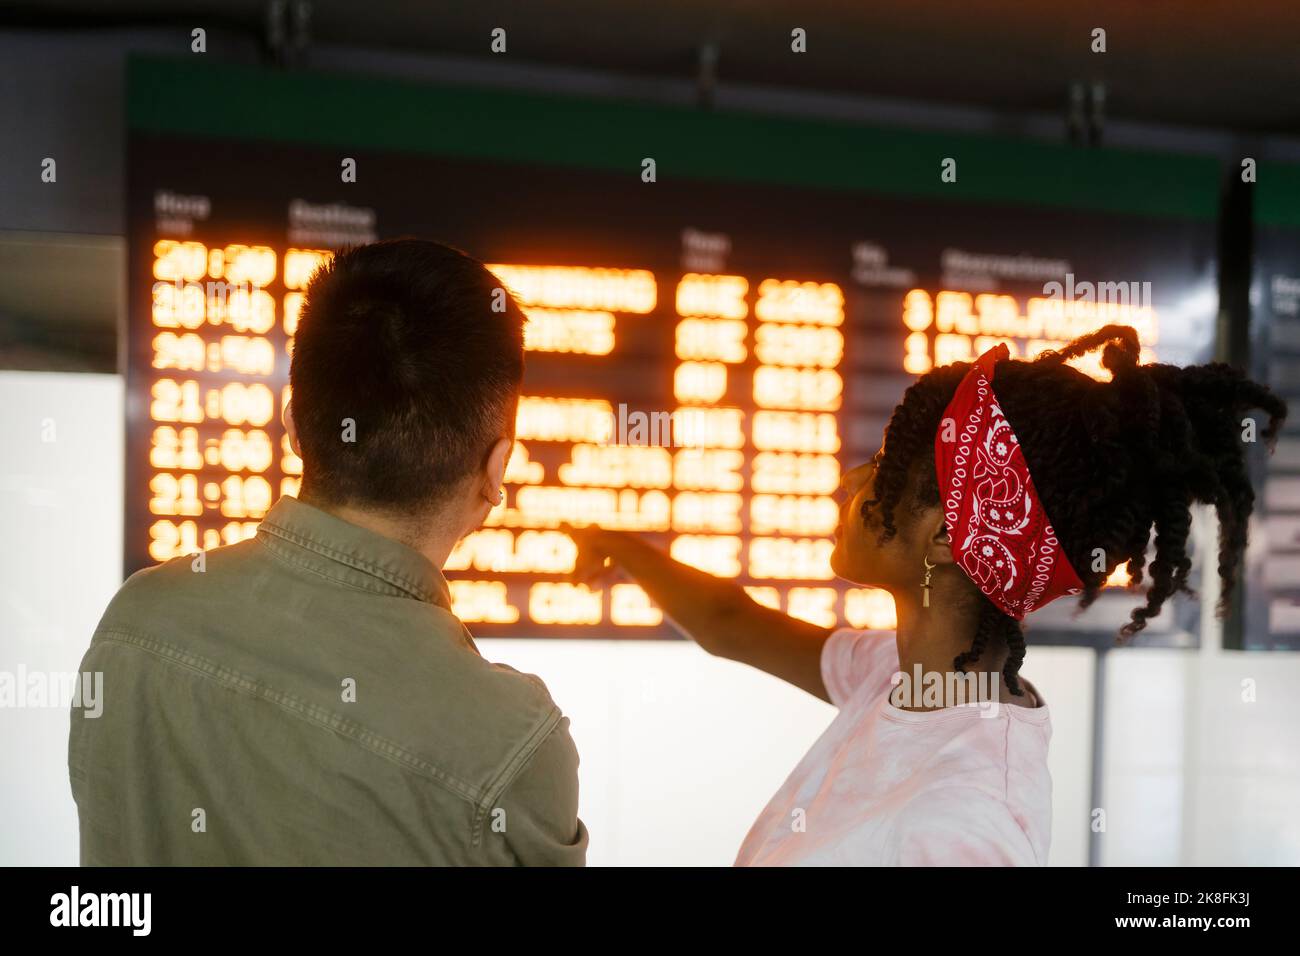 Woman with bandana pointing at departure board and talking to friend Stock Photo